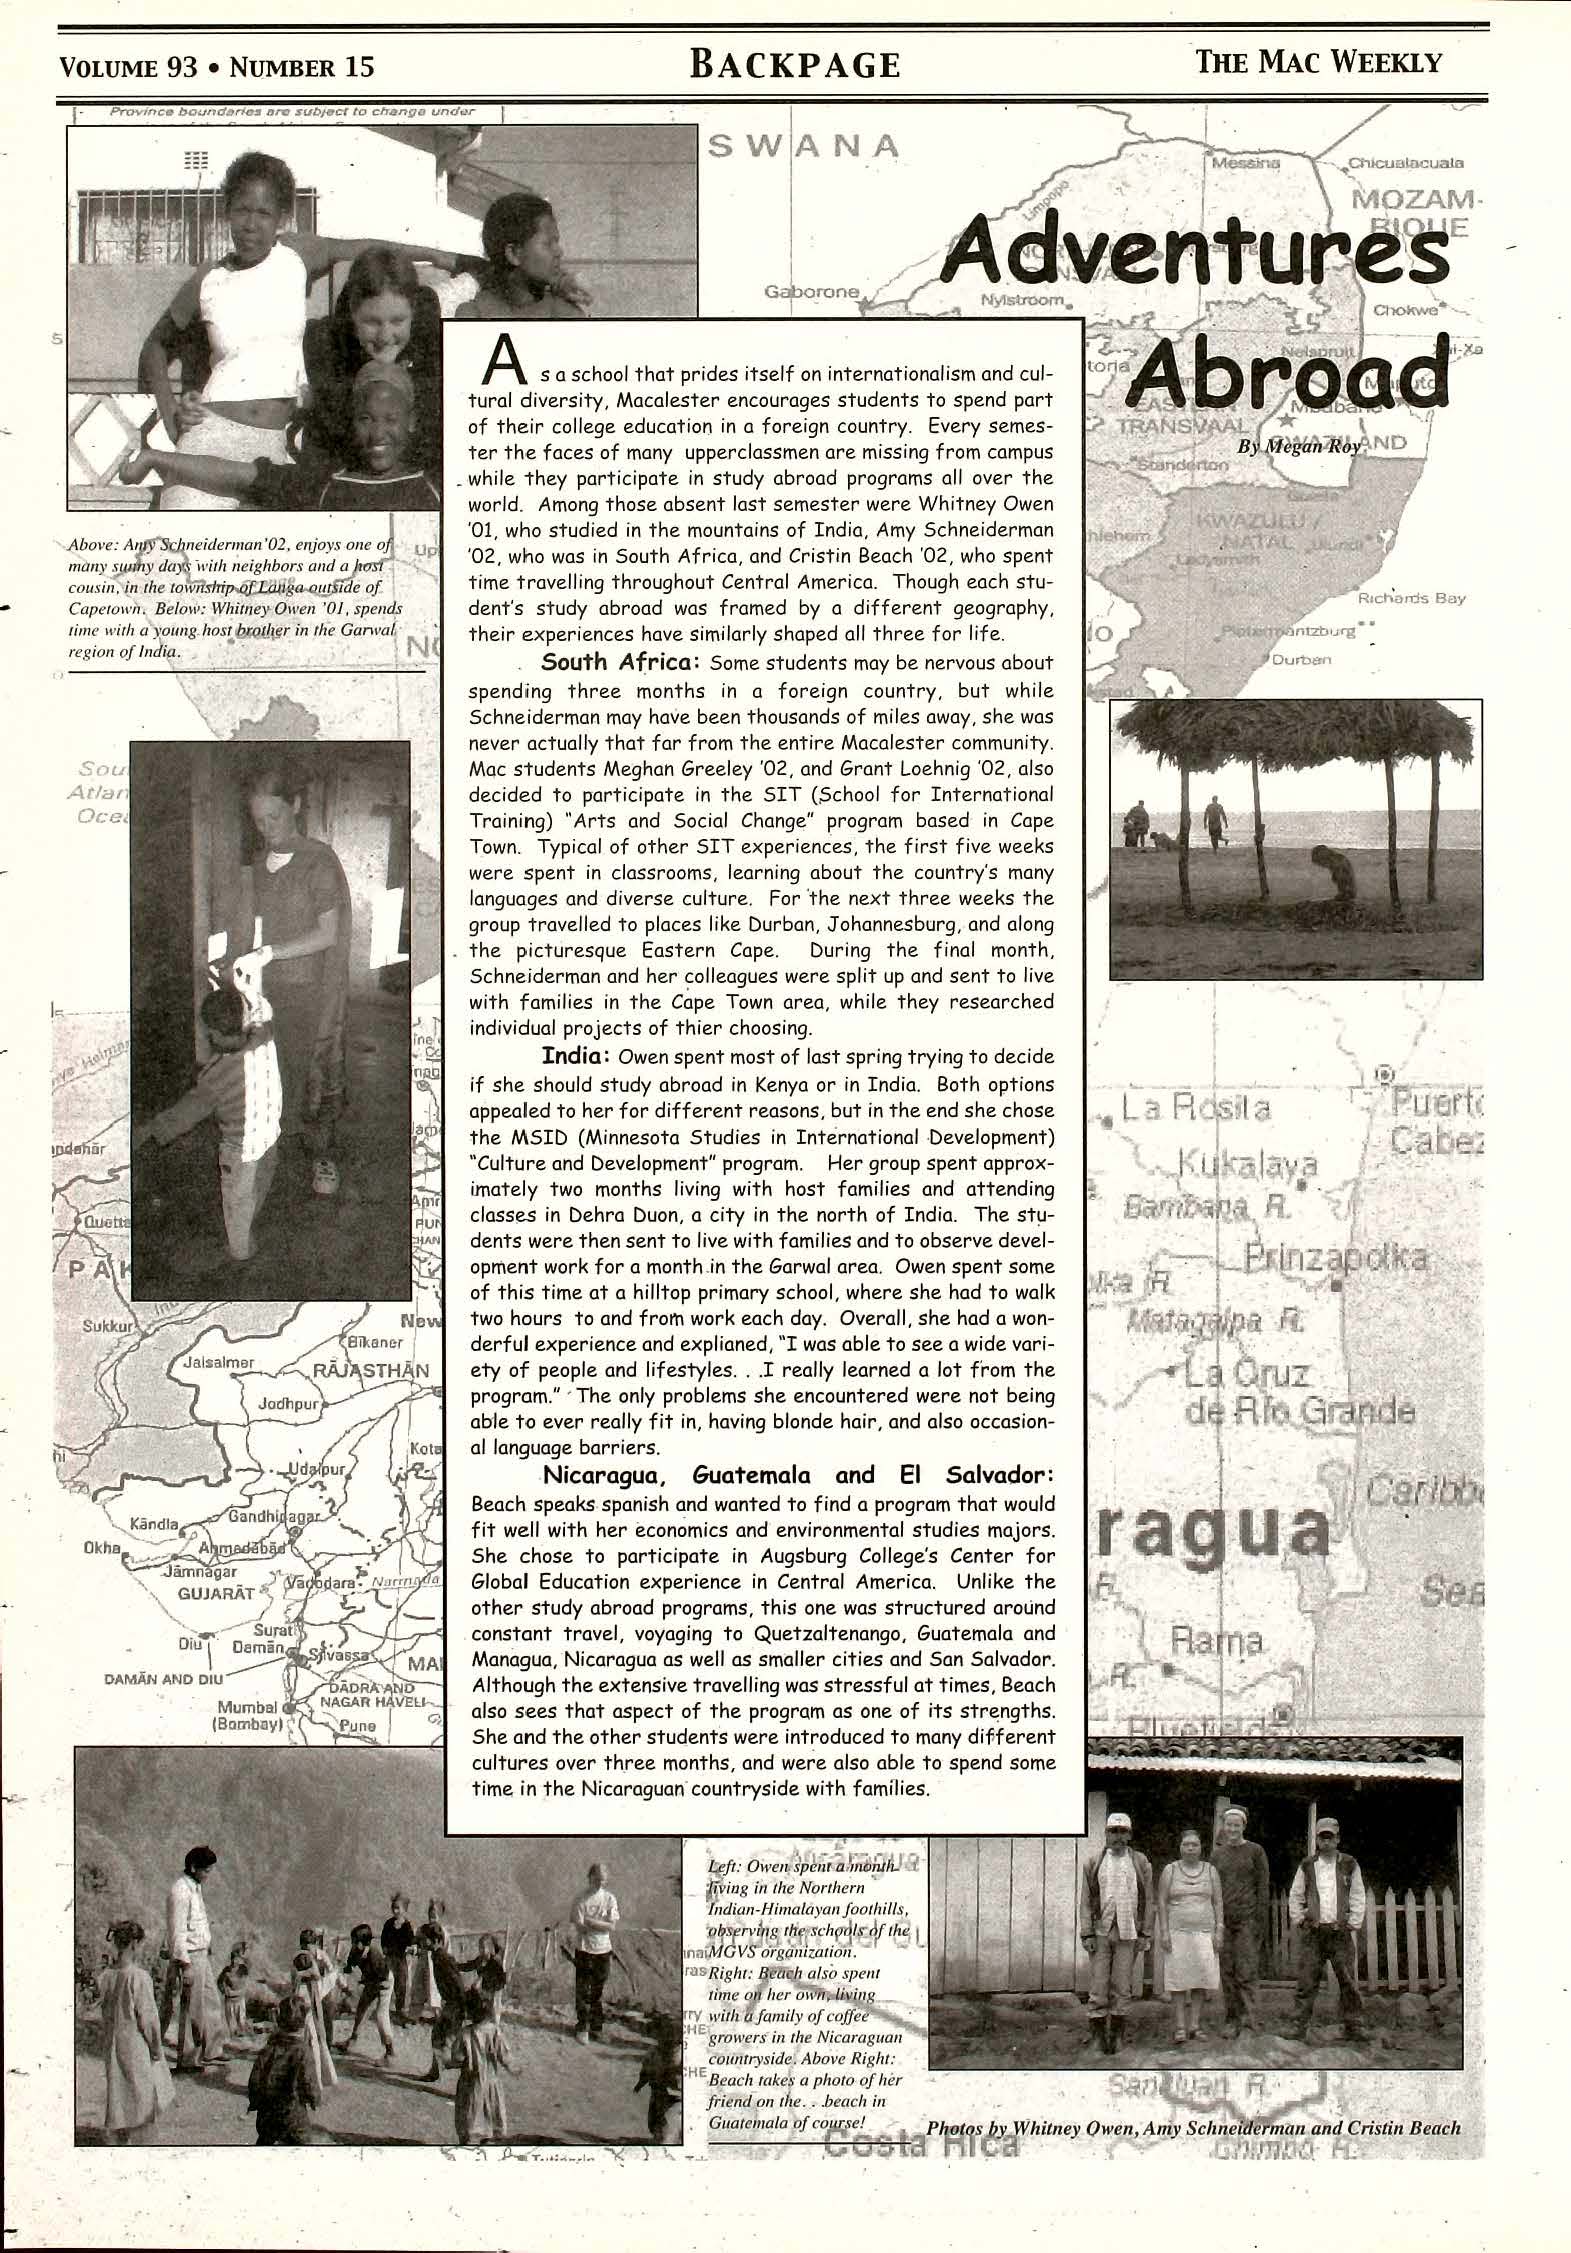 The Mac Weekly, February 16, 2001. Adventures Abroad.